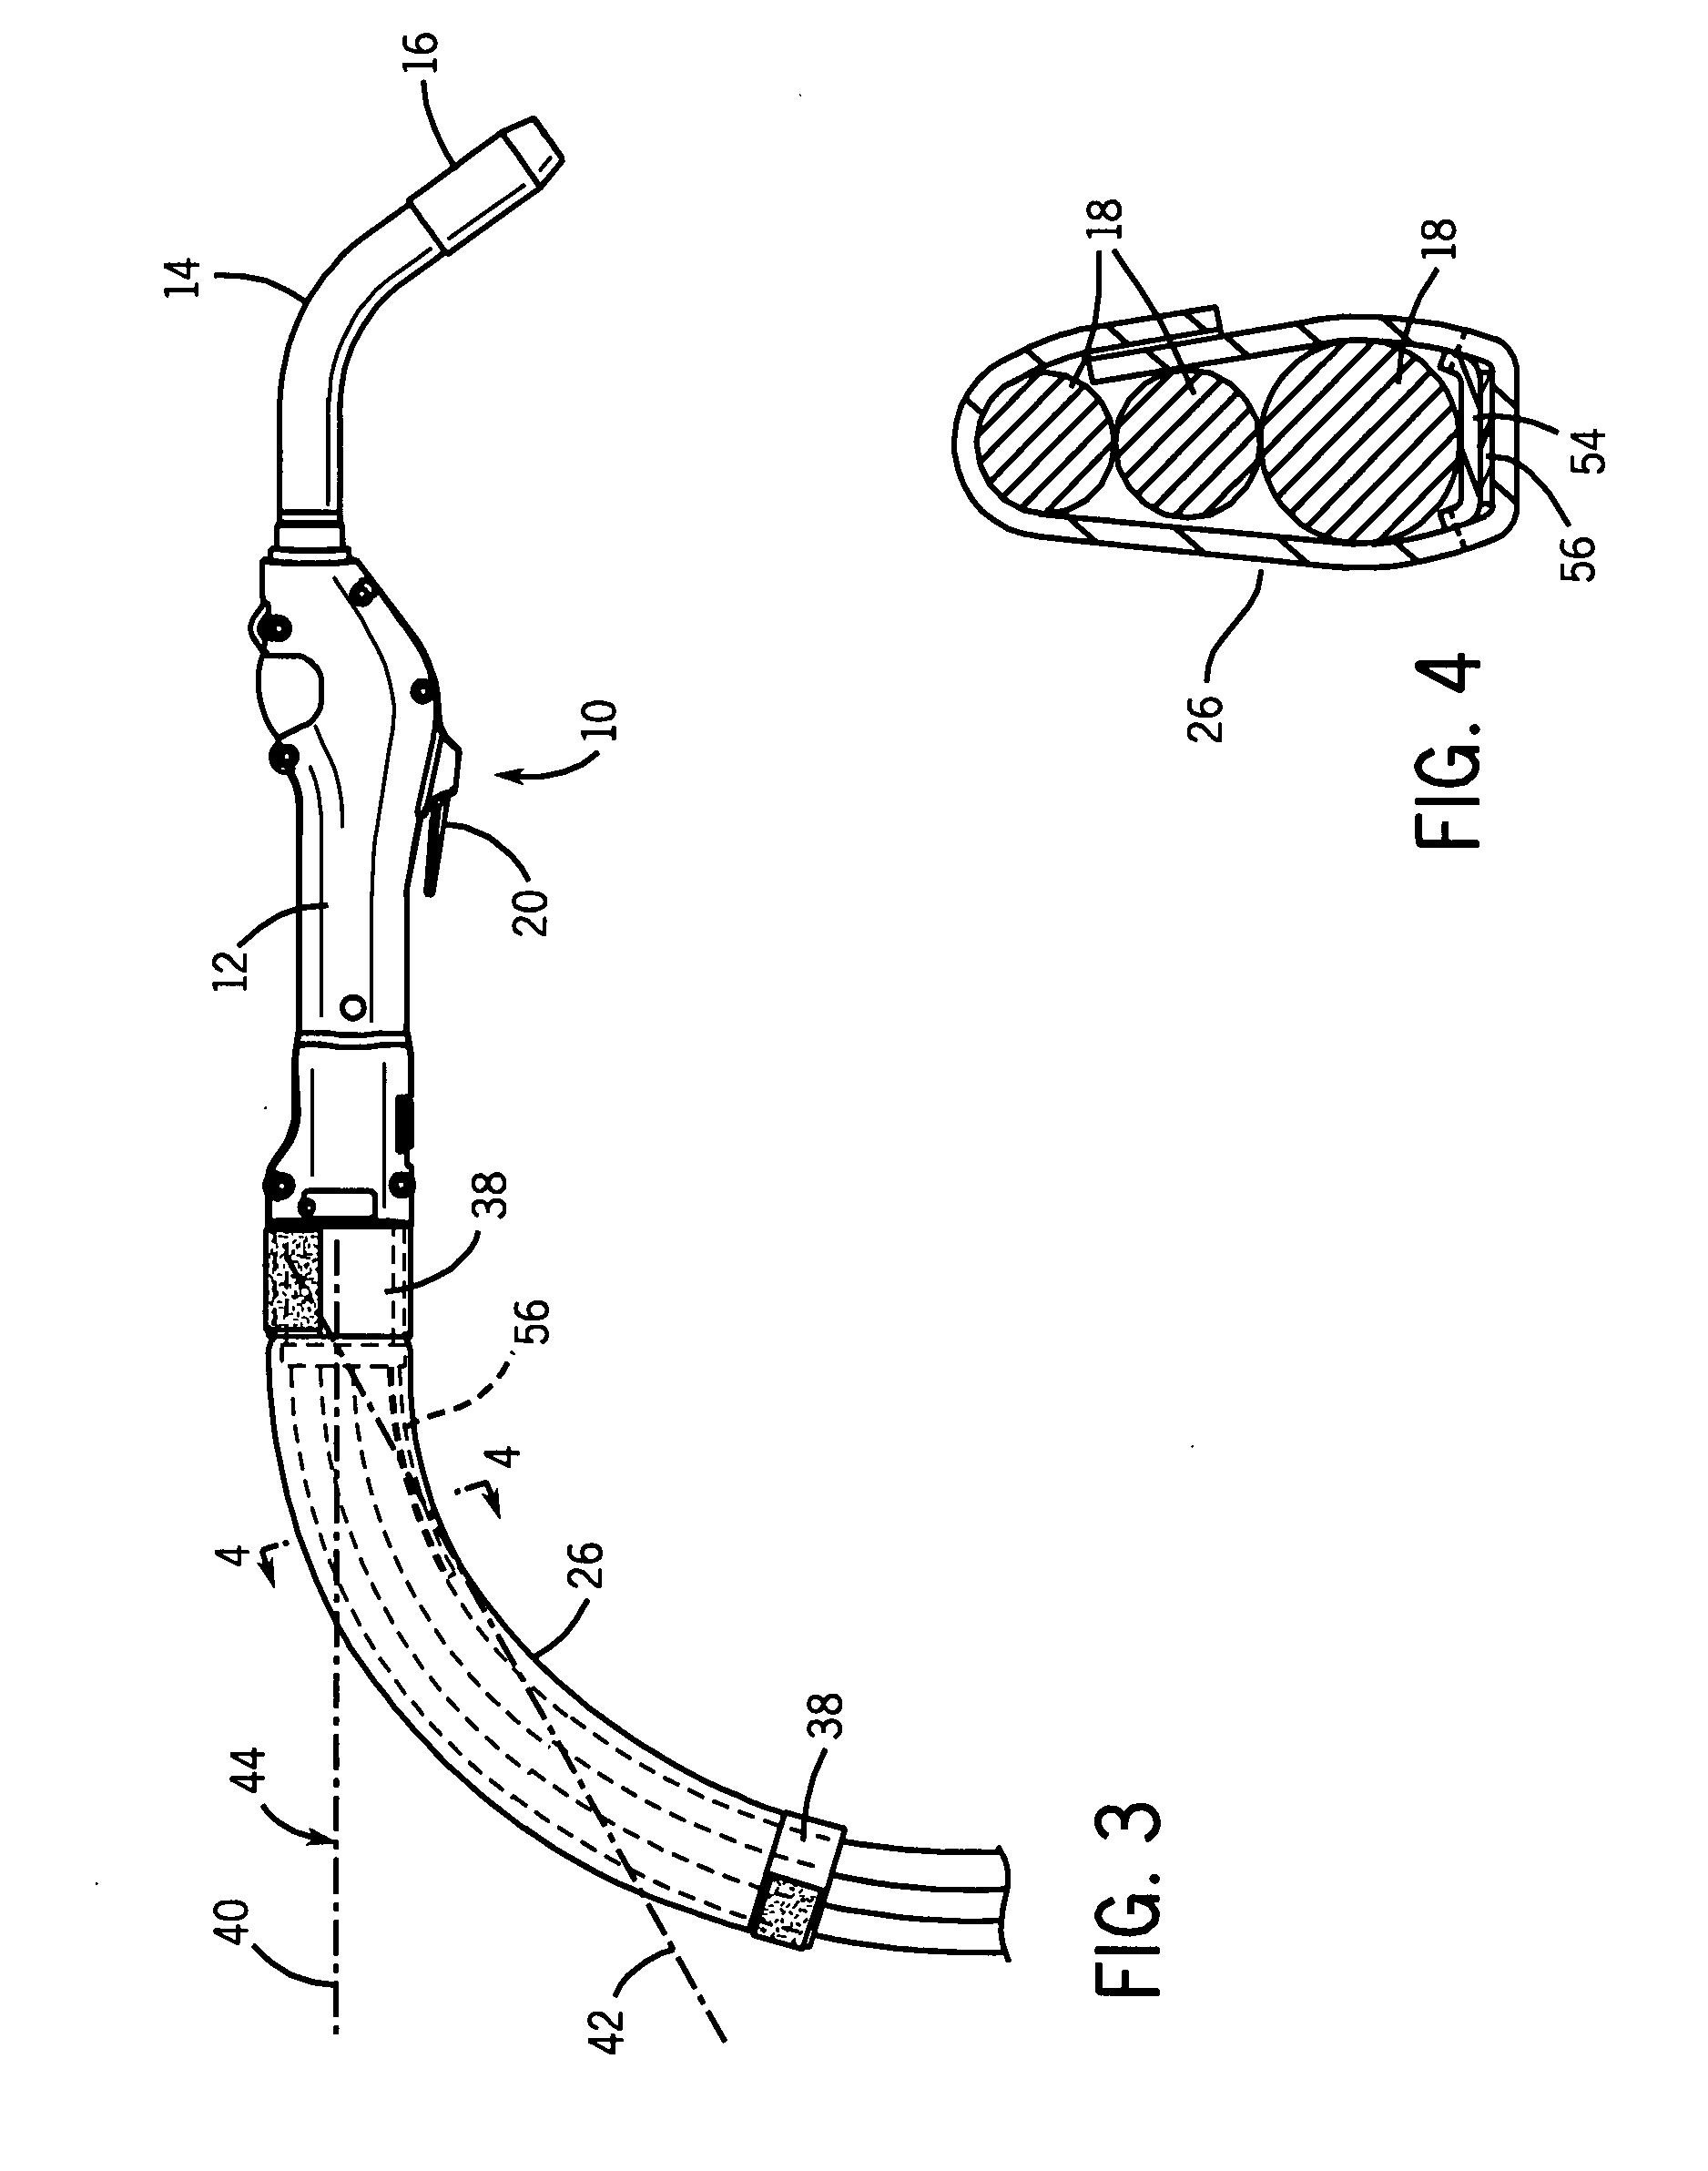 Welding torch cable strain relief system and method